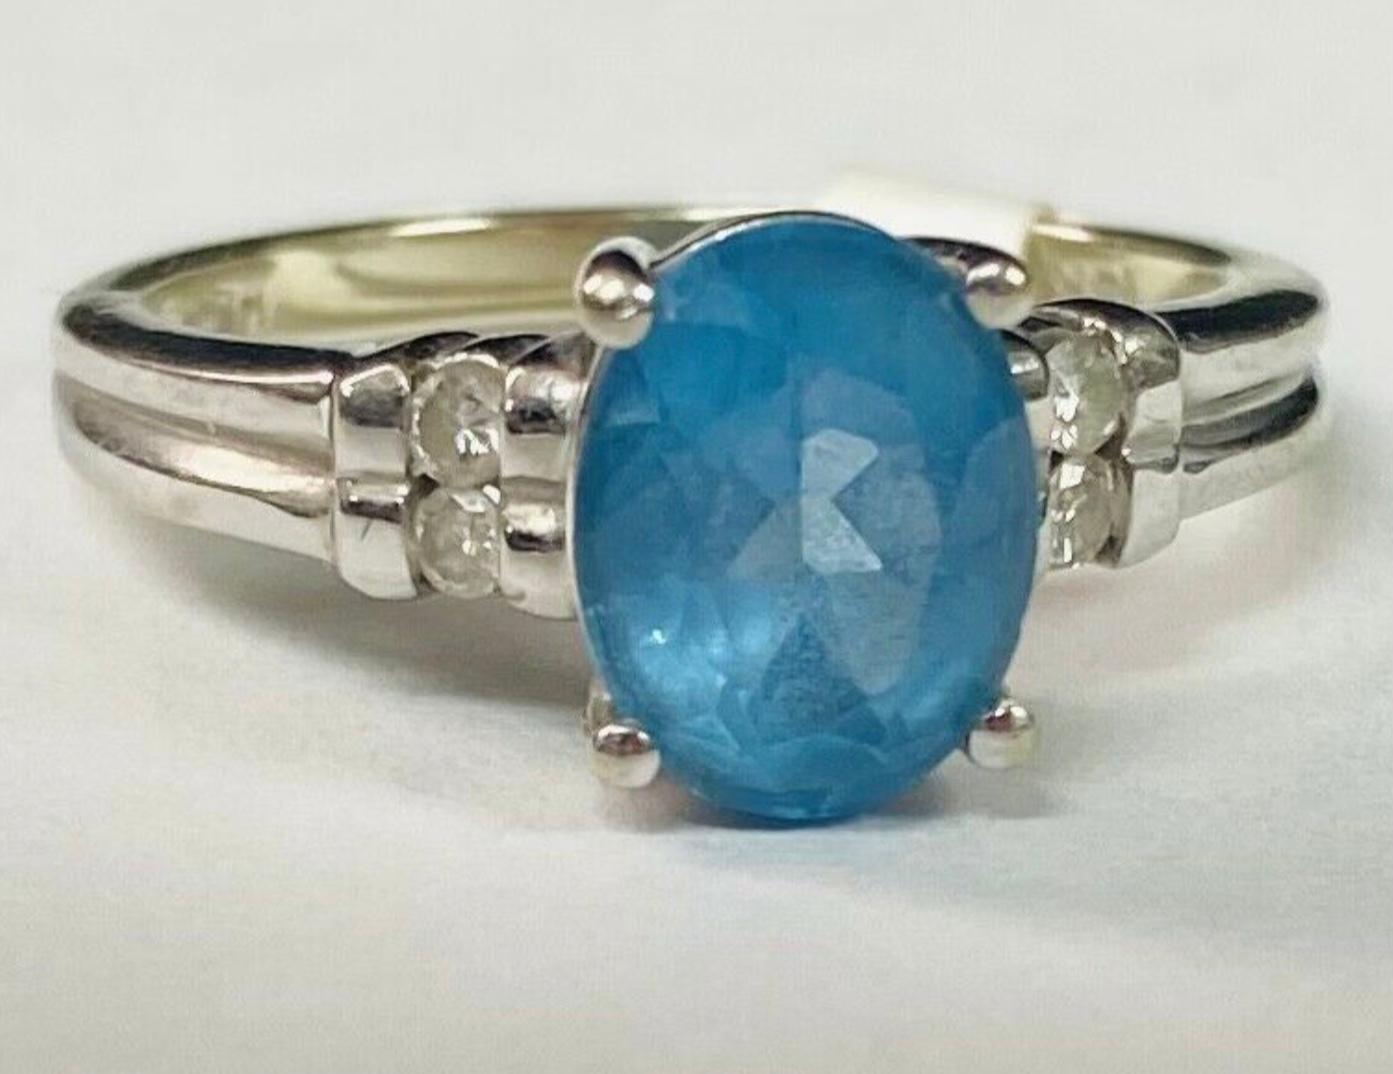 14k white gold aquamarine and diamond ring, 4.25 Grams TW. The dimensions of the oval aquamarine are approximately 9 mm x 6 mm. The ring has four round single cut diamonds. Marked 14k. Approximate size 7.